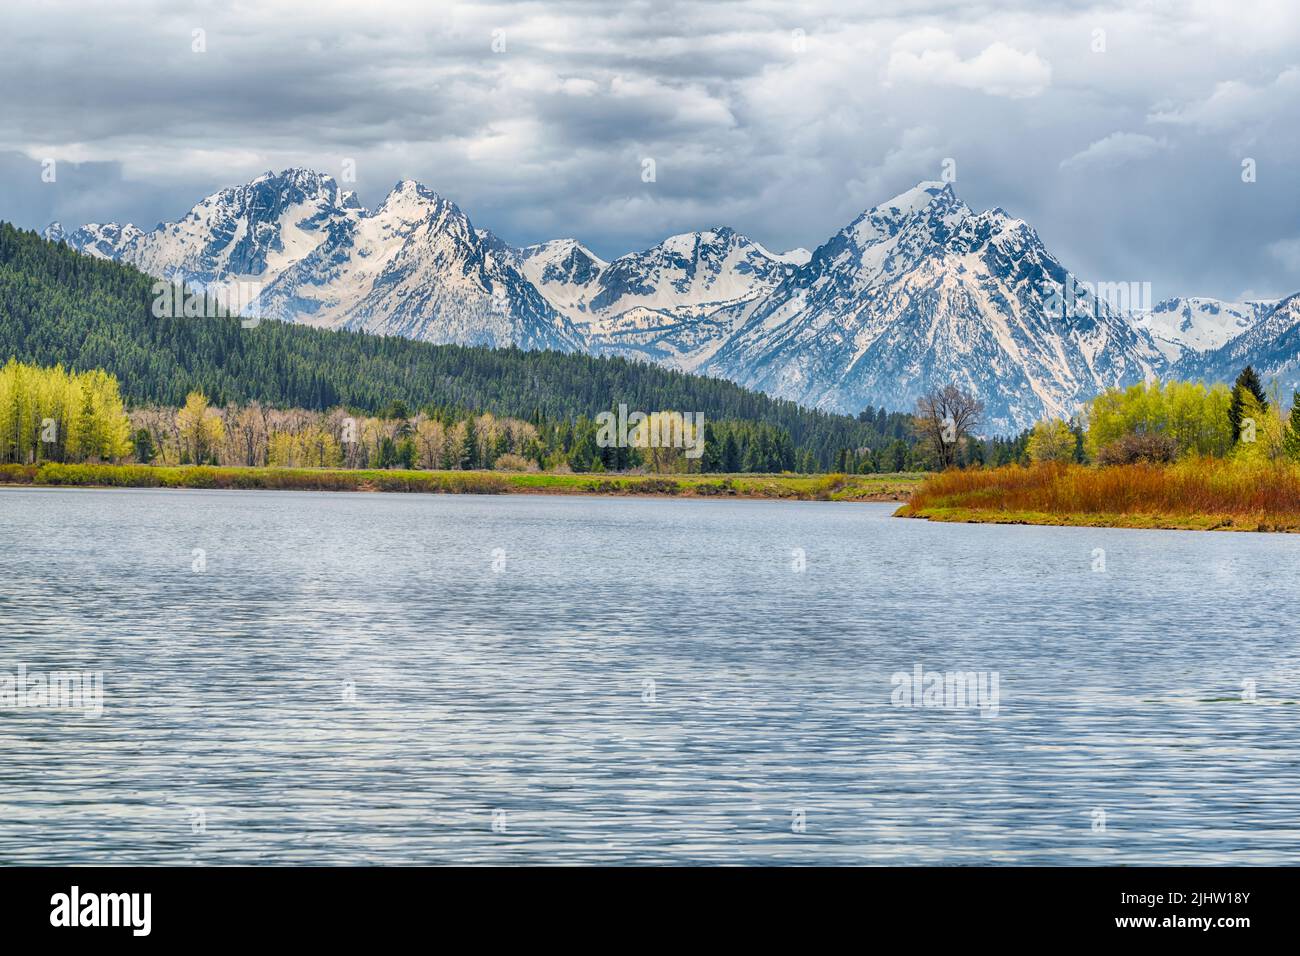 Ominous clouds at Oxbow Bend along the Snake River in Grand Teton National Park, Wyoming Stock Photo